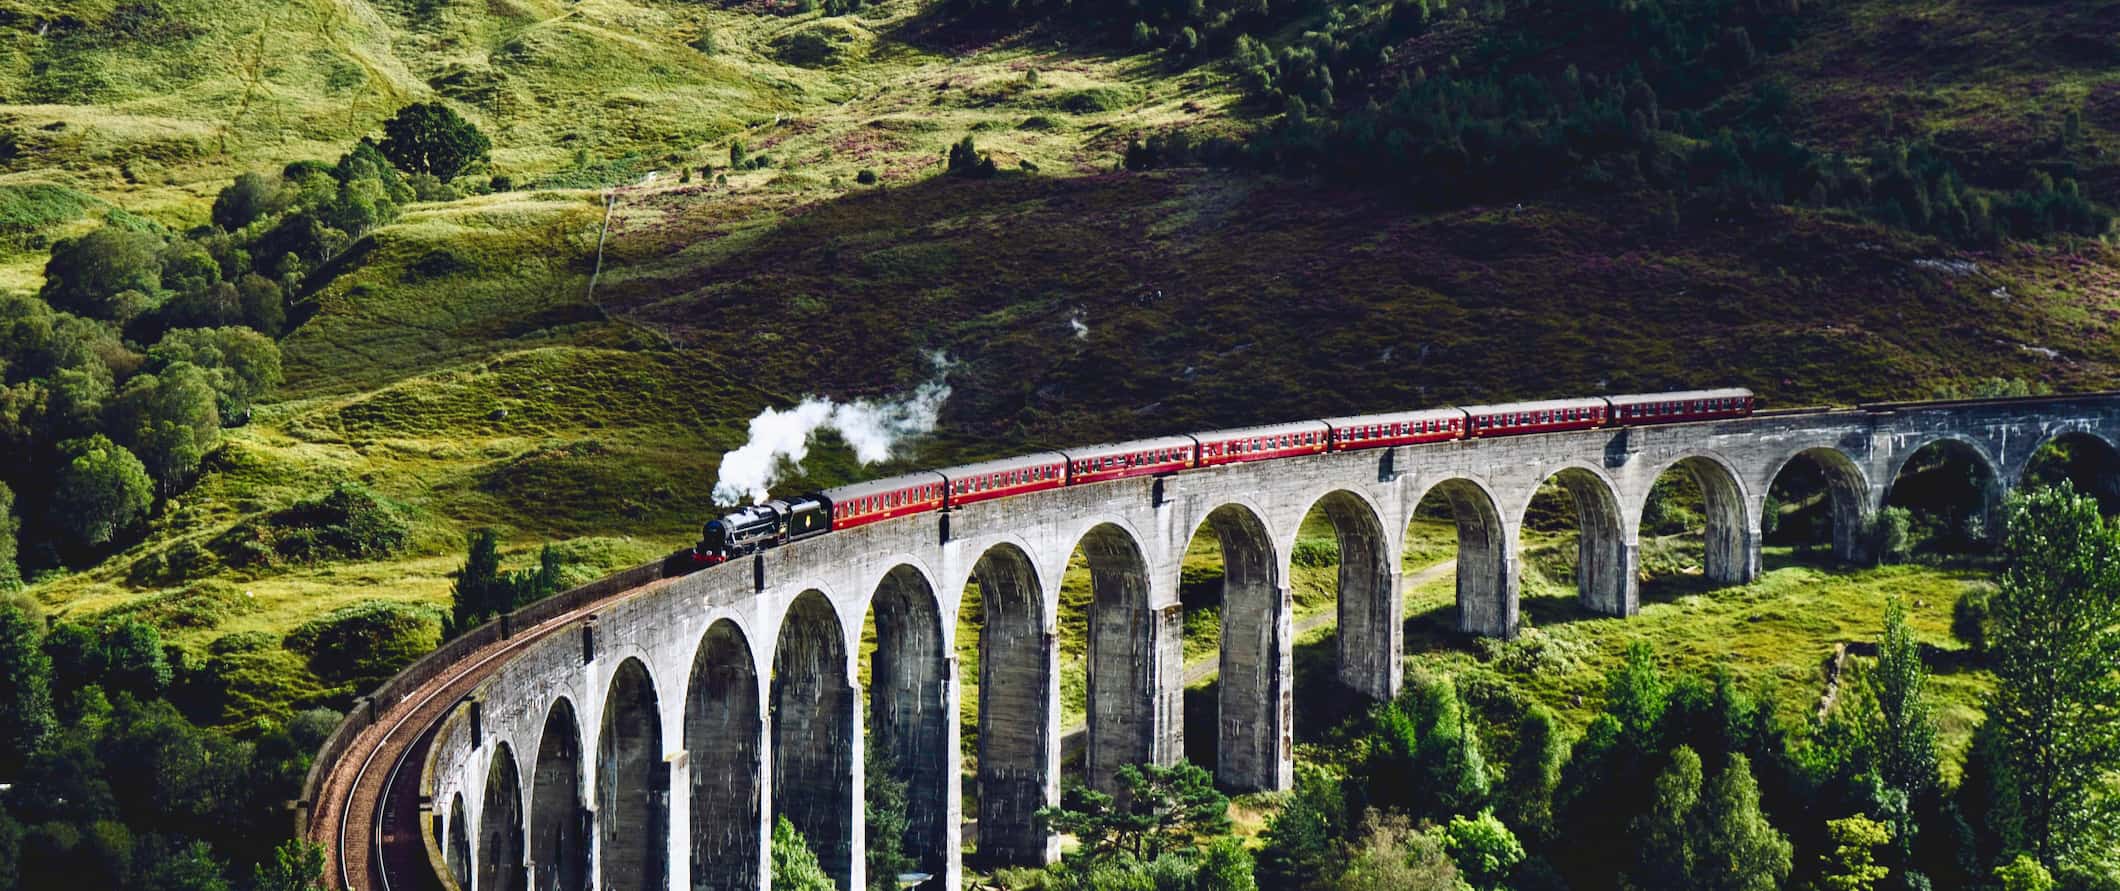 The famous steam train from Harry Potter crossing an old bridge in Scotland